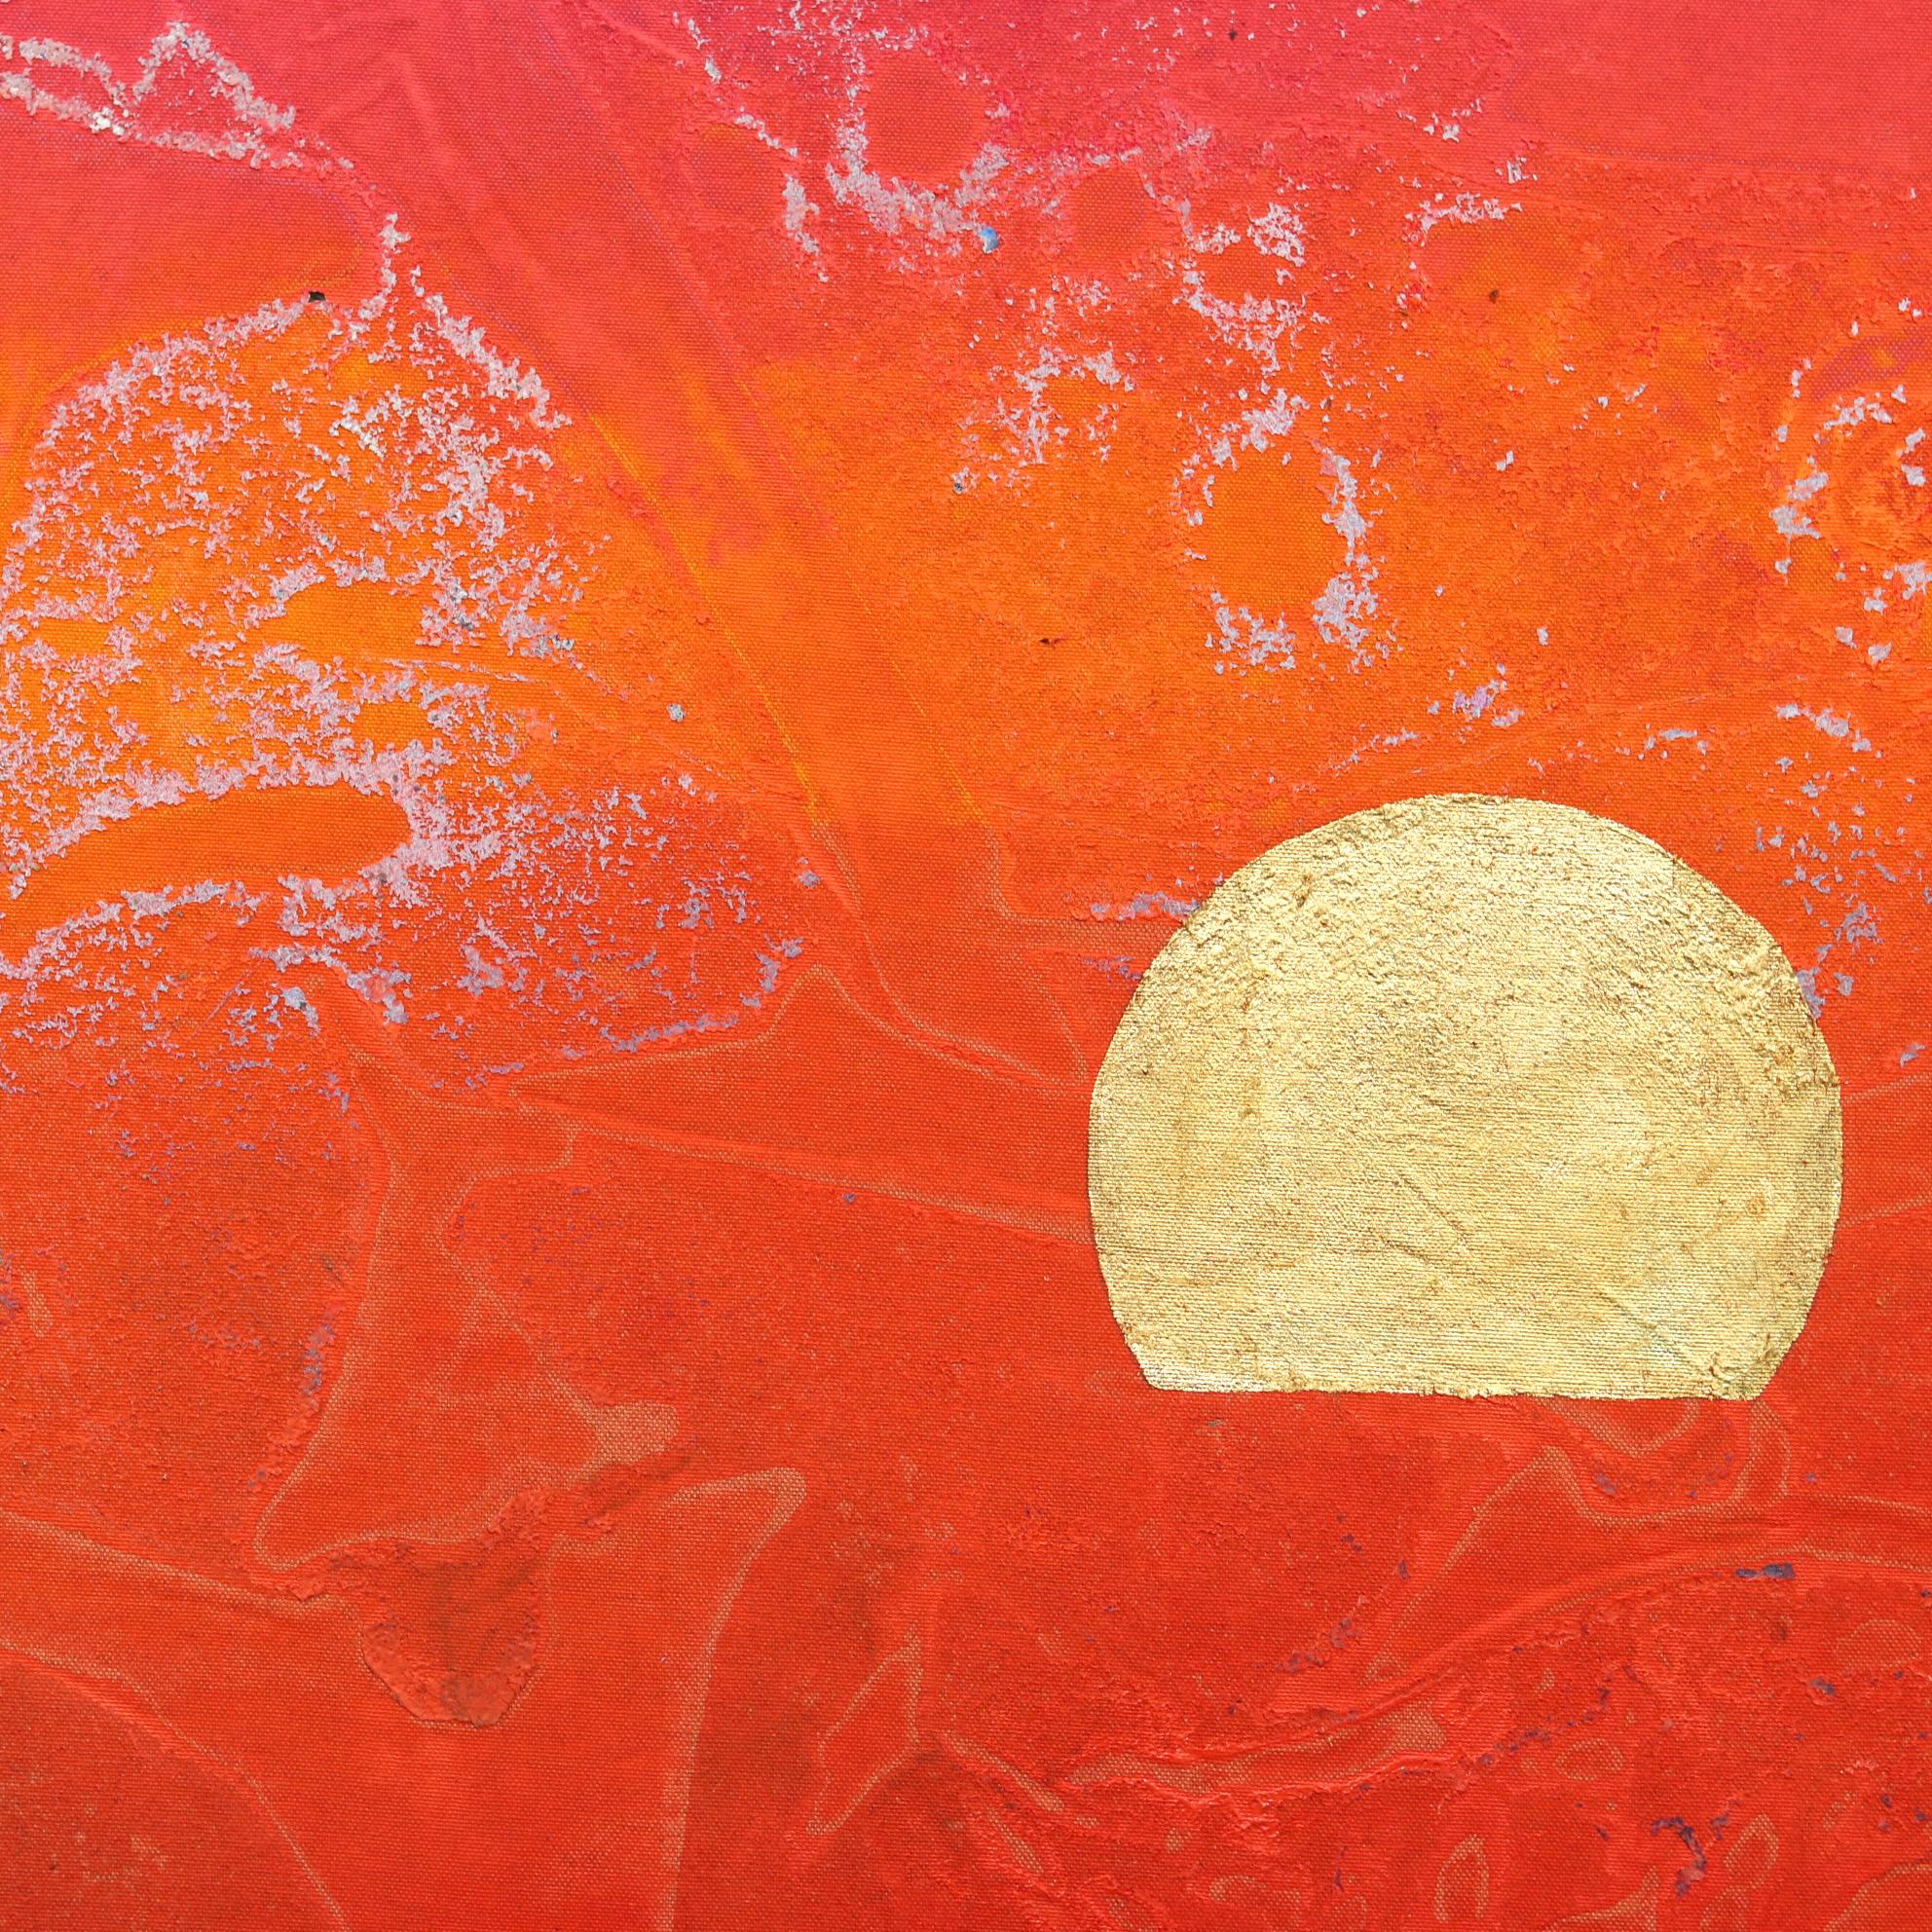 Concrete Sunset 2 - Bold Meditative Gold Leaf Red Painting on Linen Canvas For Sale 6